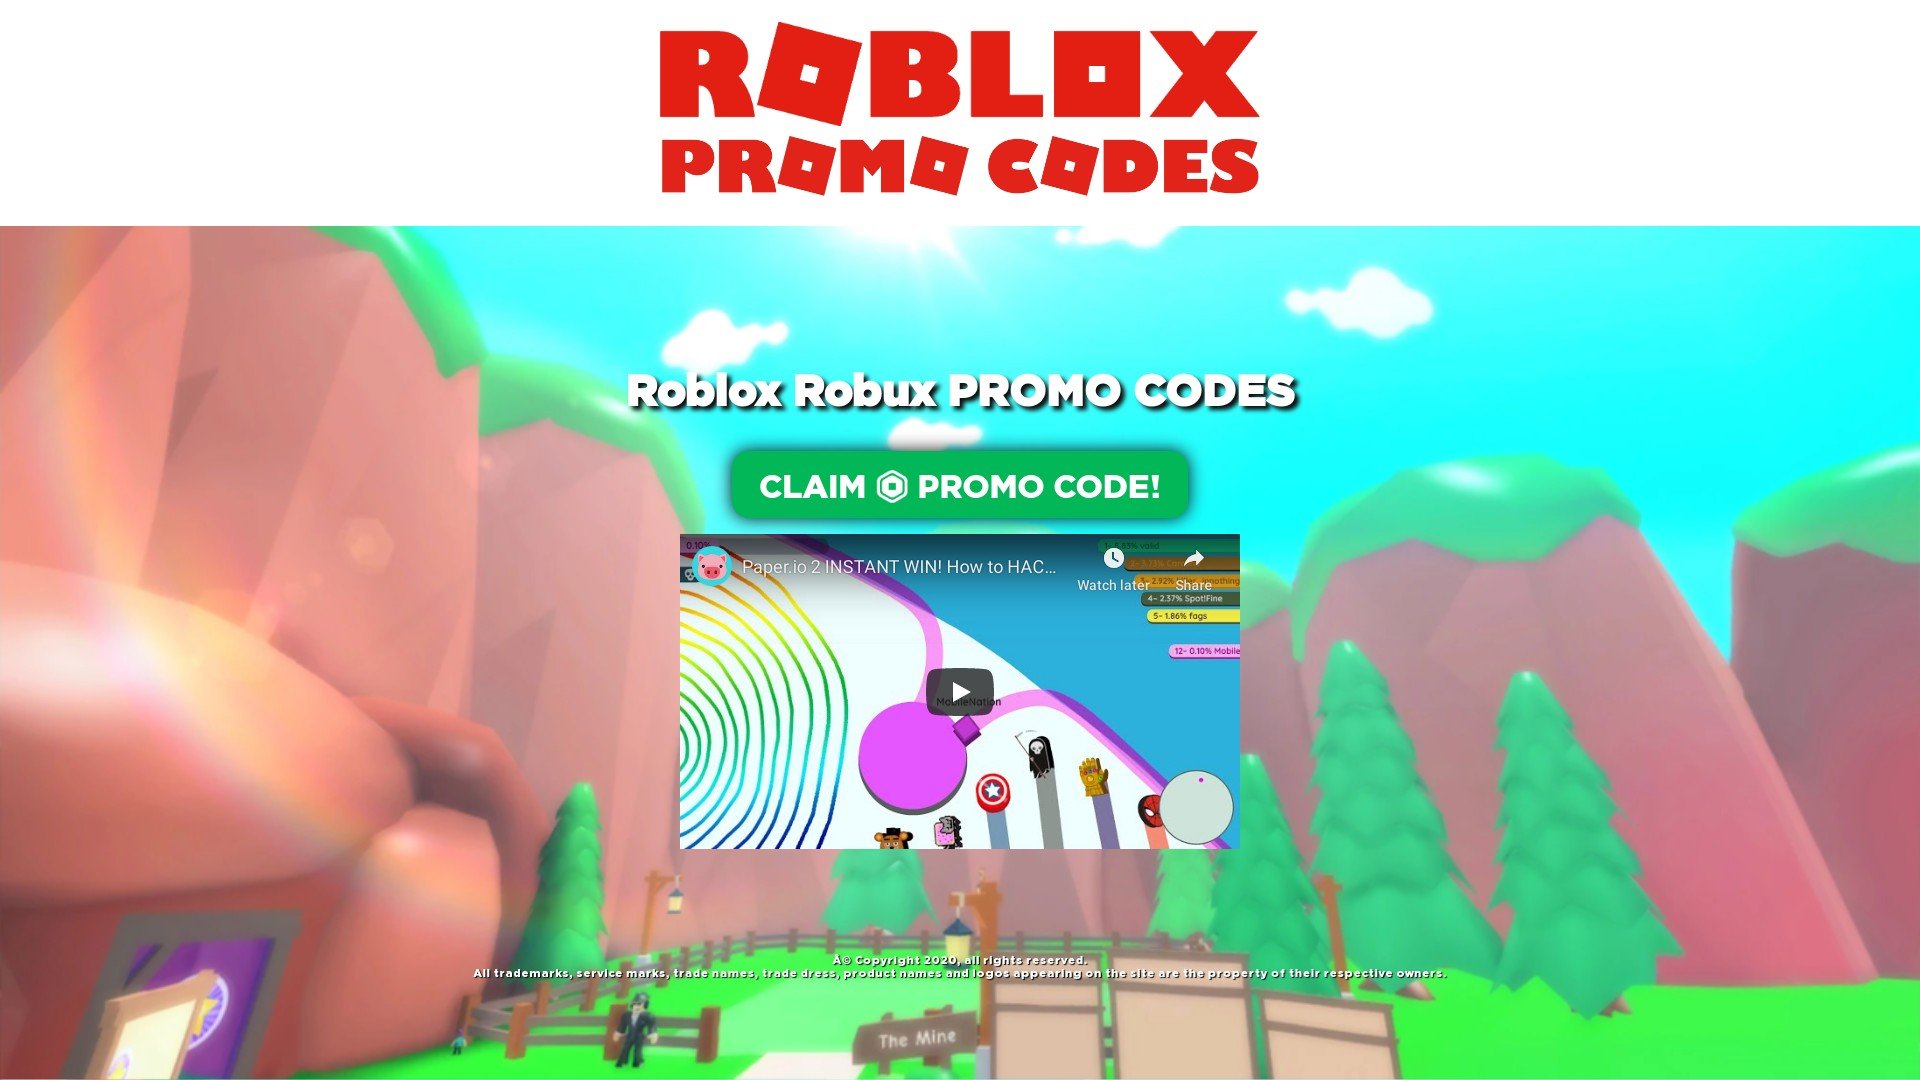 Robuxpromo